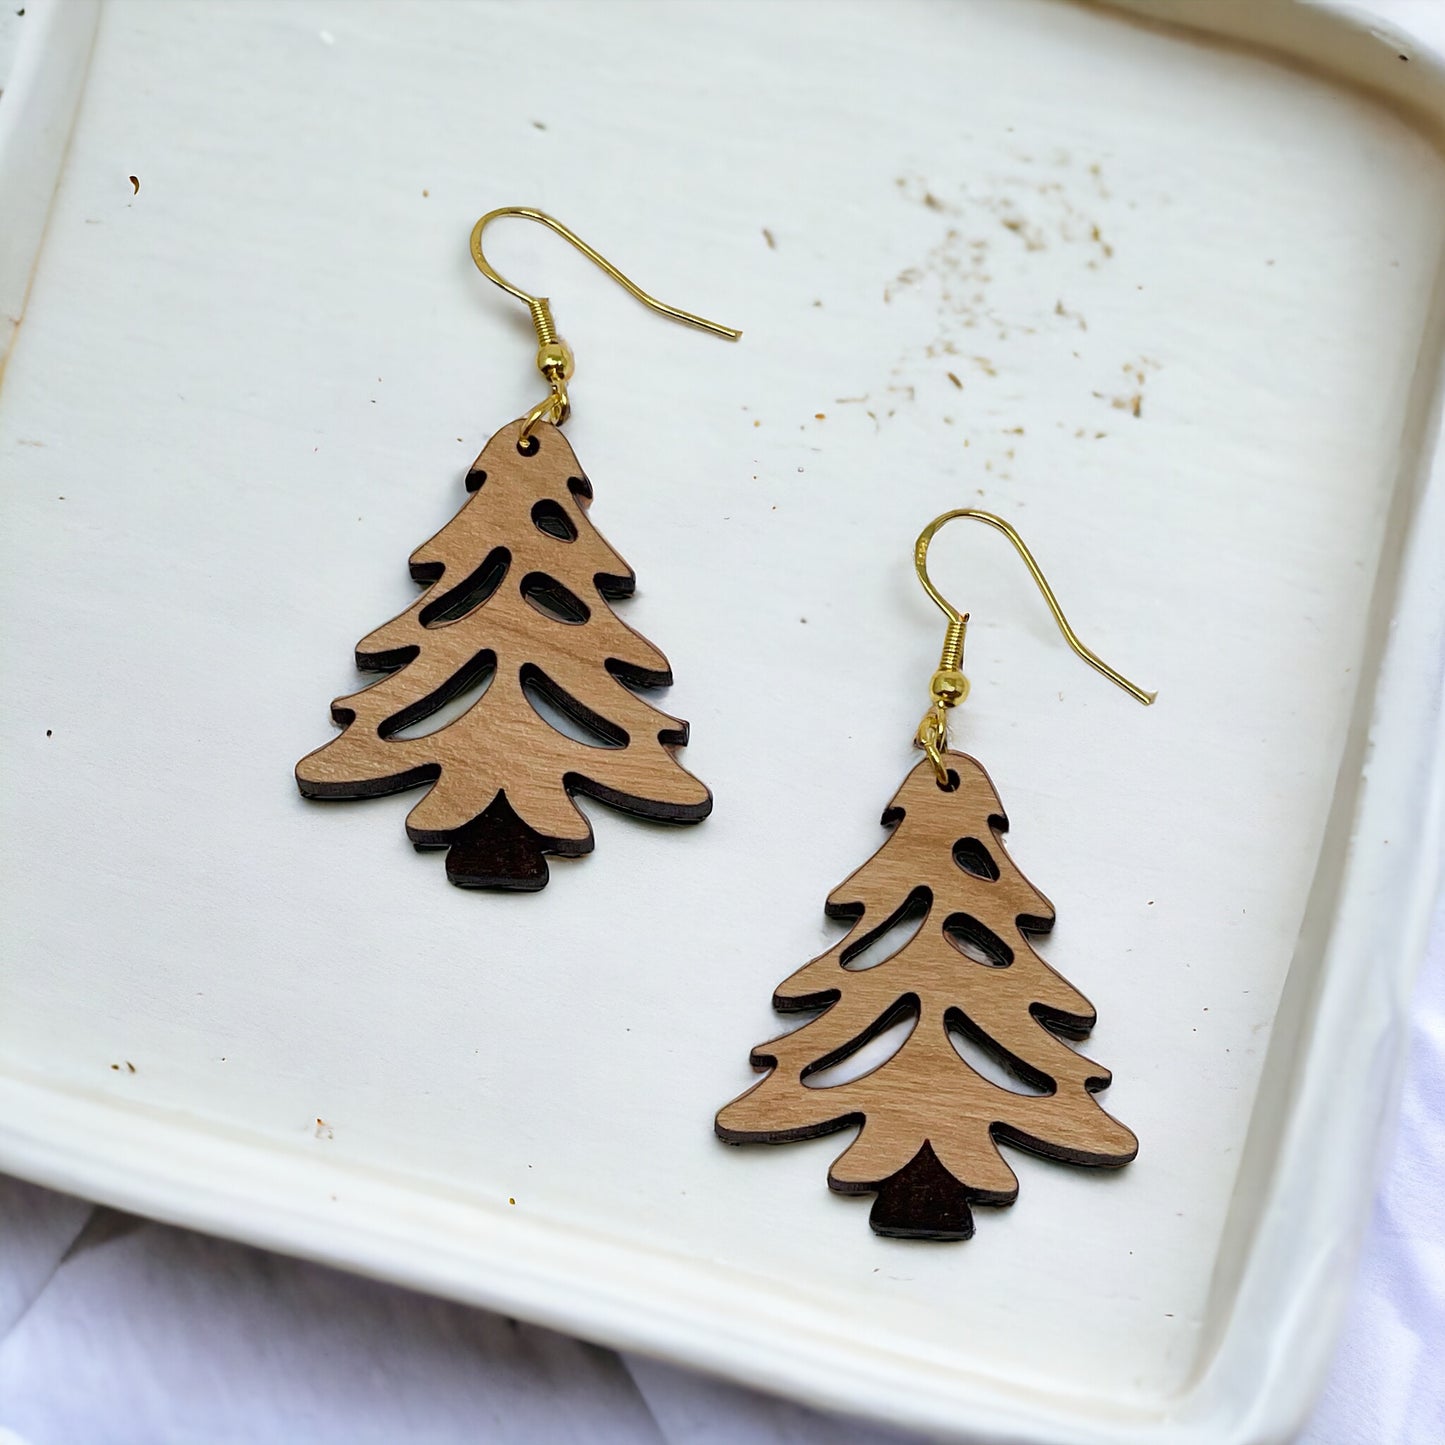 Tree Earrings - Rustic Wood Dangle Earrings with a Whimsical Boho Touch, Cute Winter Holiday Accessories | Nature-Inspired Jewelry